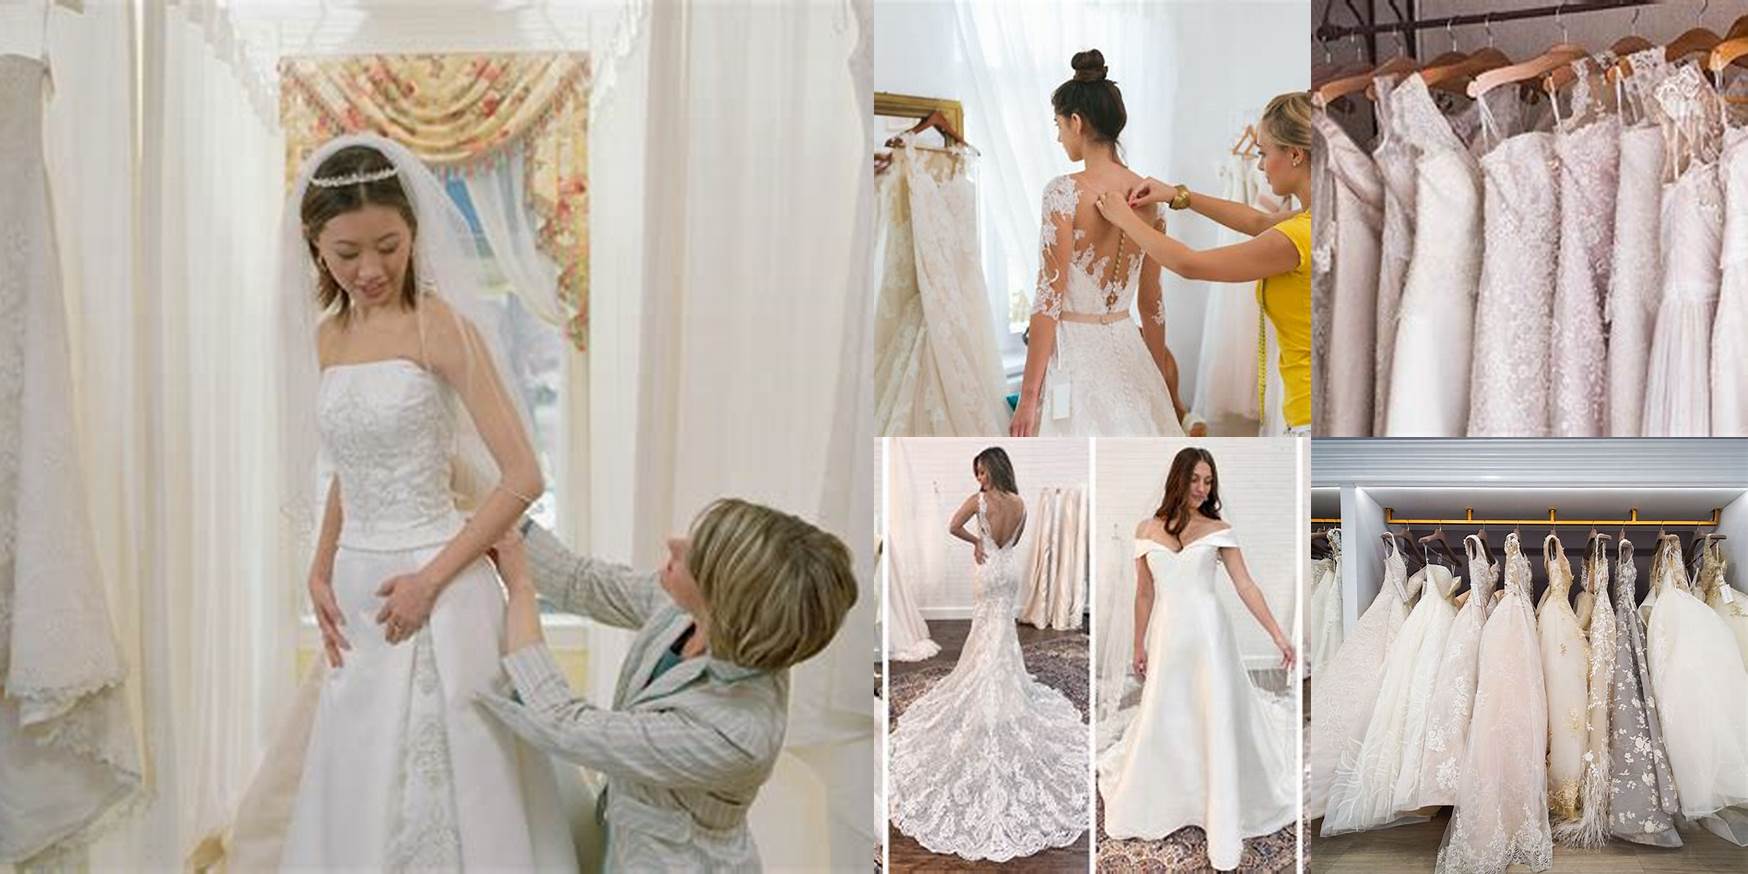 How Many Fittings For Wedding Dress